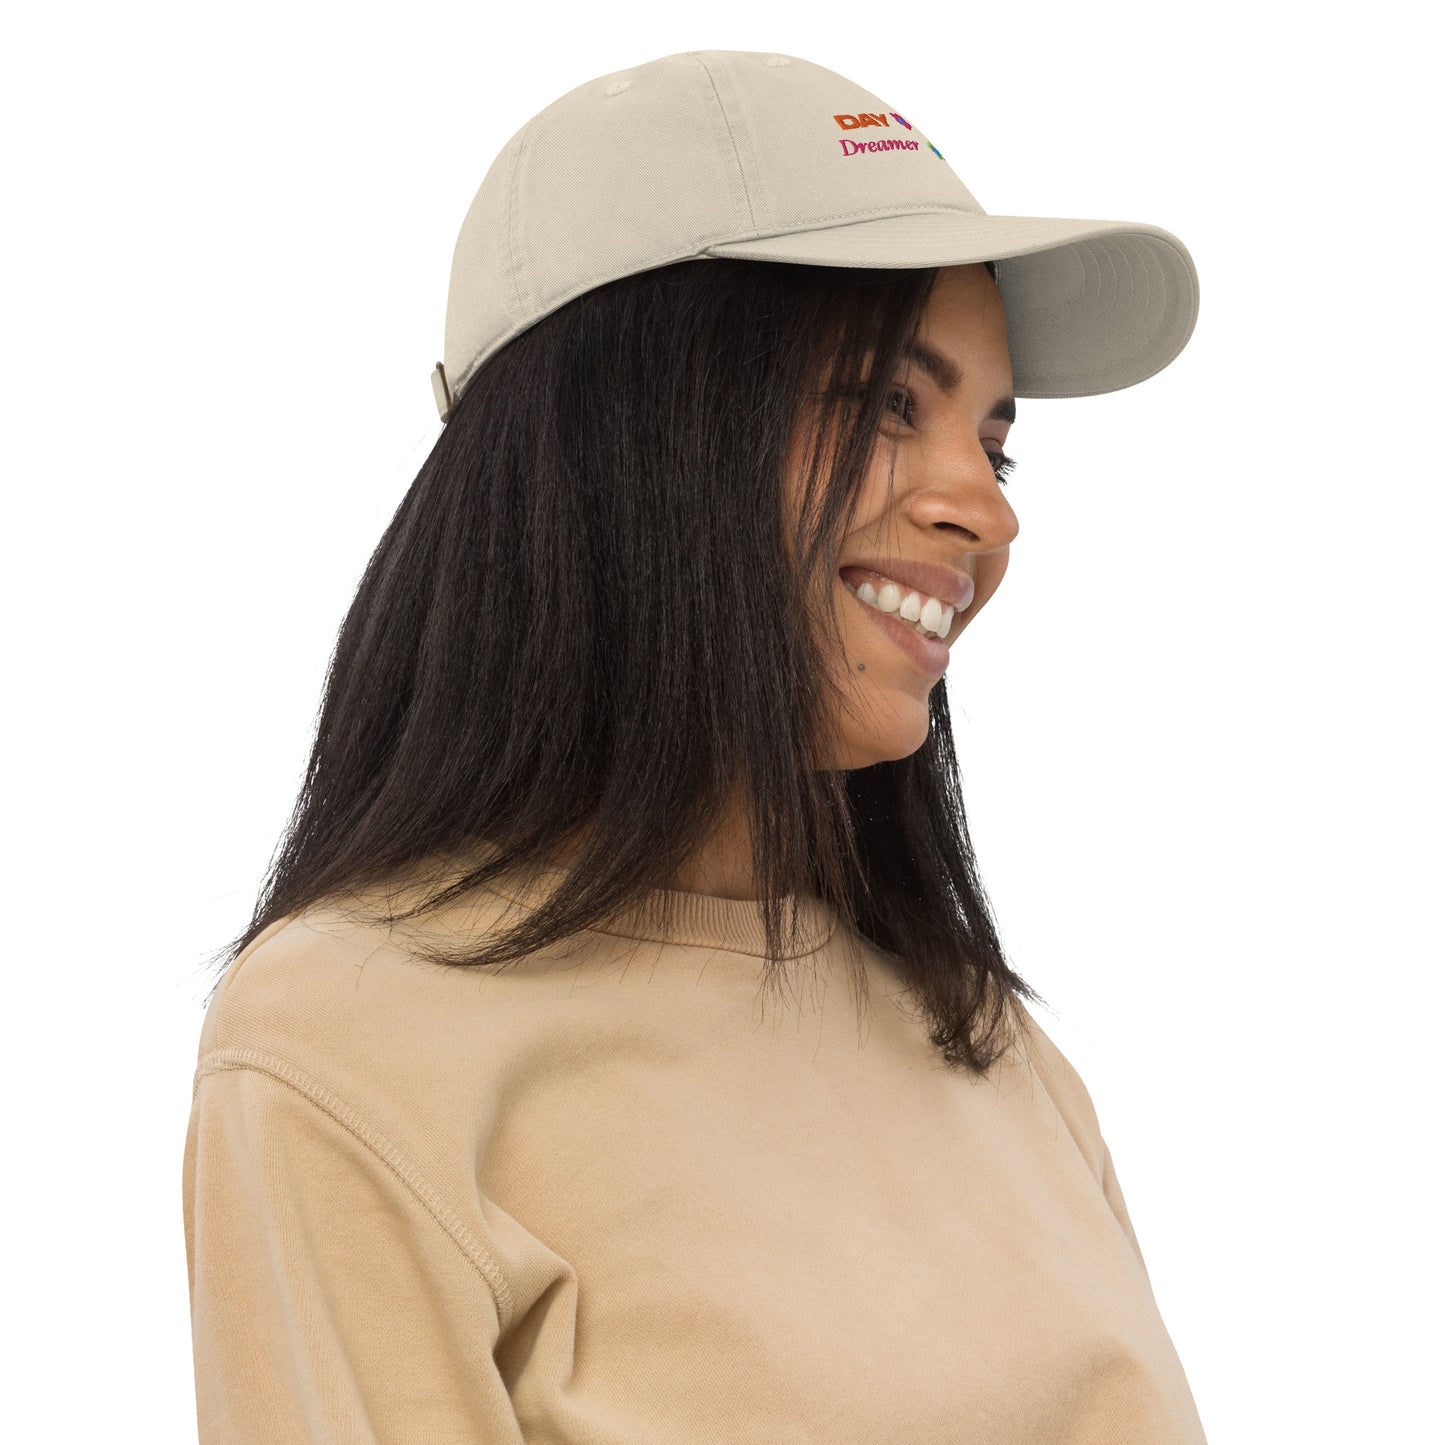 Day Dreamer Floral Organic Cotton dad hat